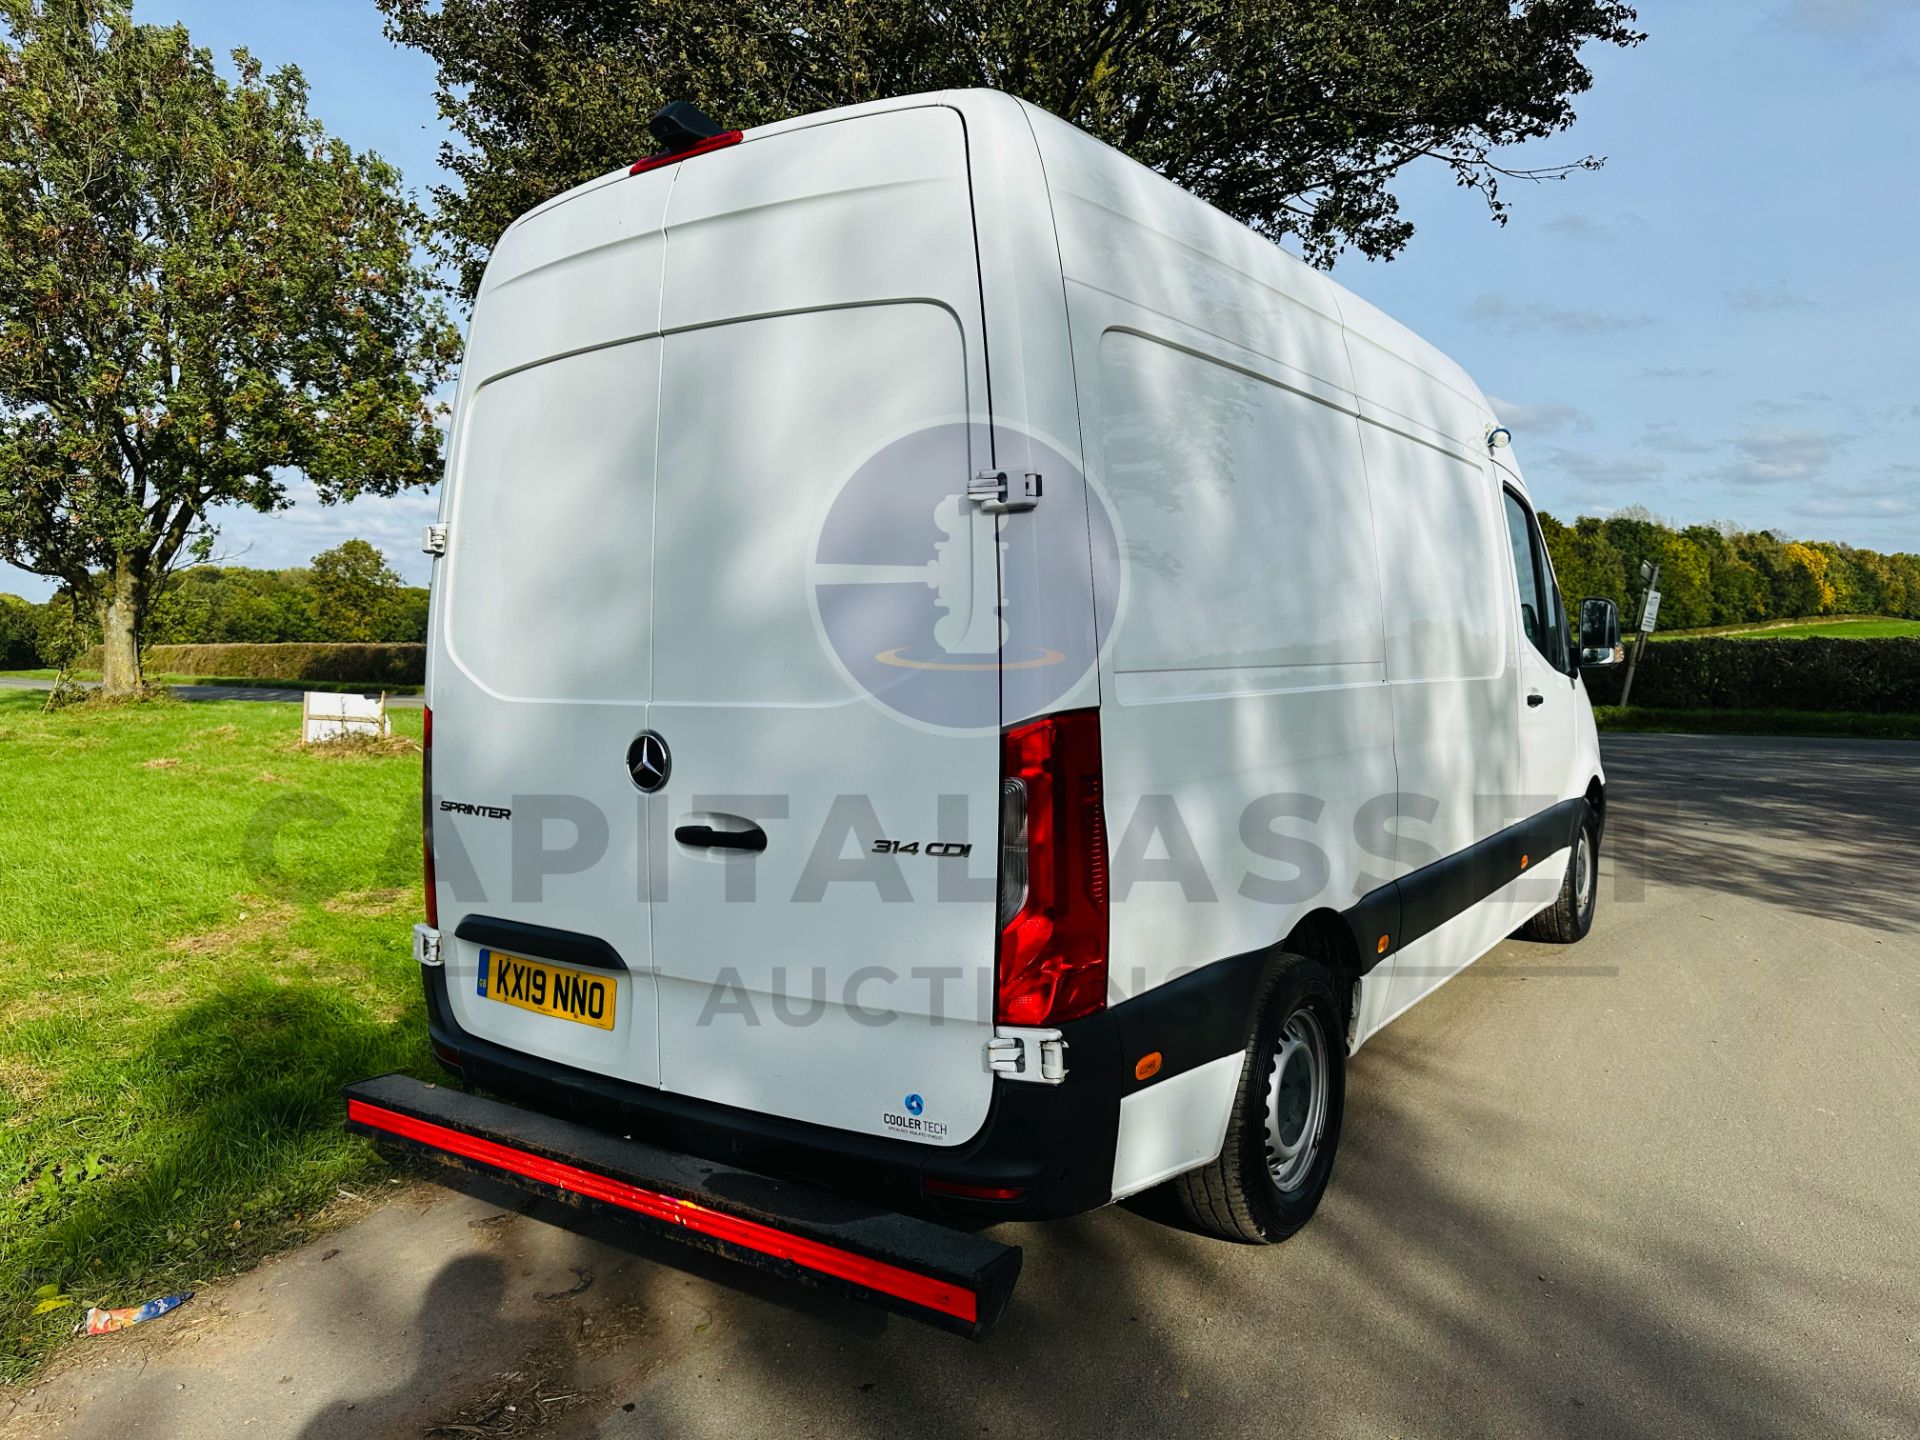 MERCEDES-BENZ SPRINTER 314 CDI *MWB - REFRIGERATED VAN* (2019 - FACELIFT MODEL) *OVERNIGHT STANDBY* - Image 16 of 44